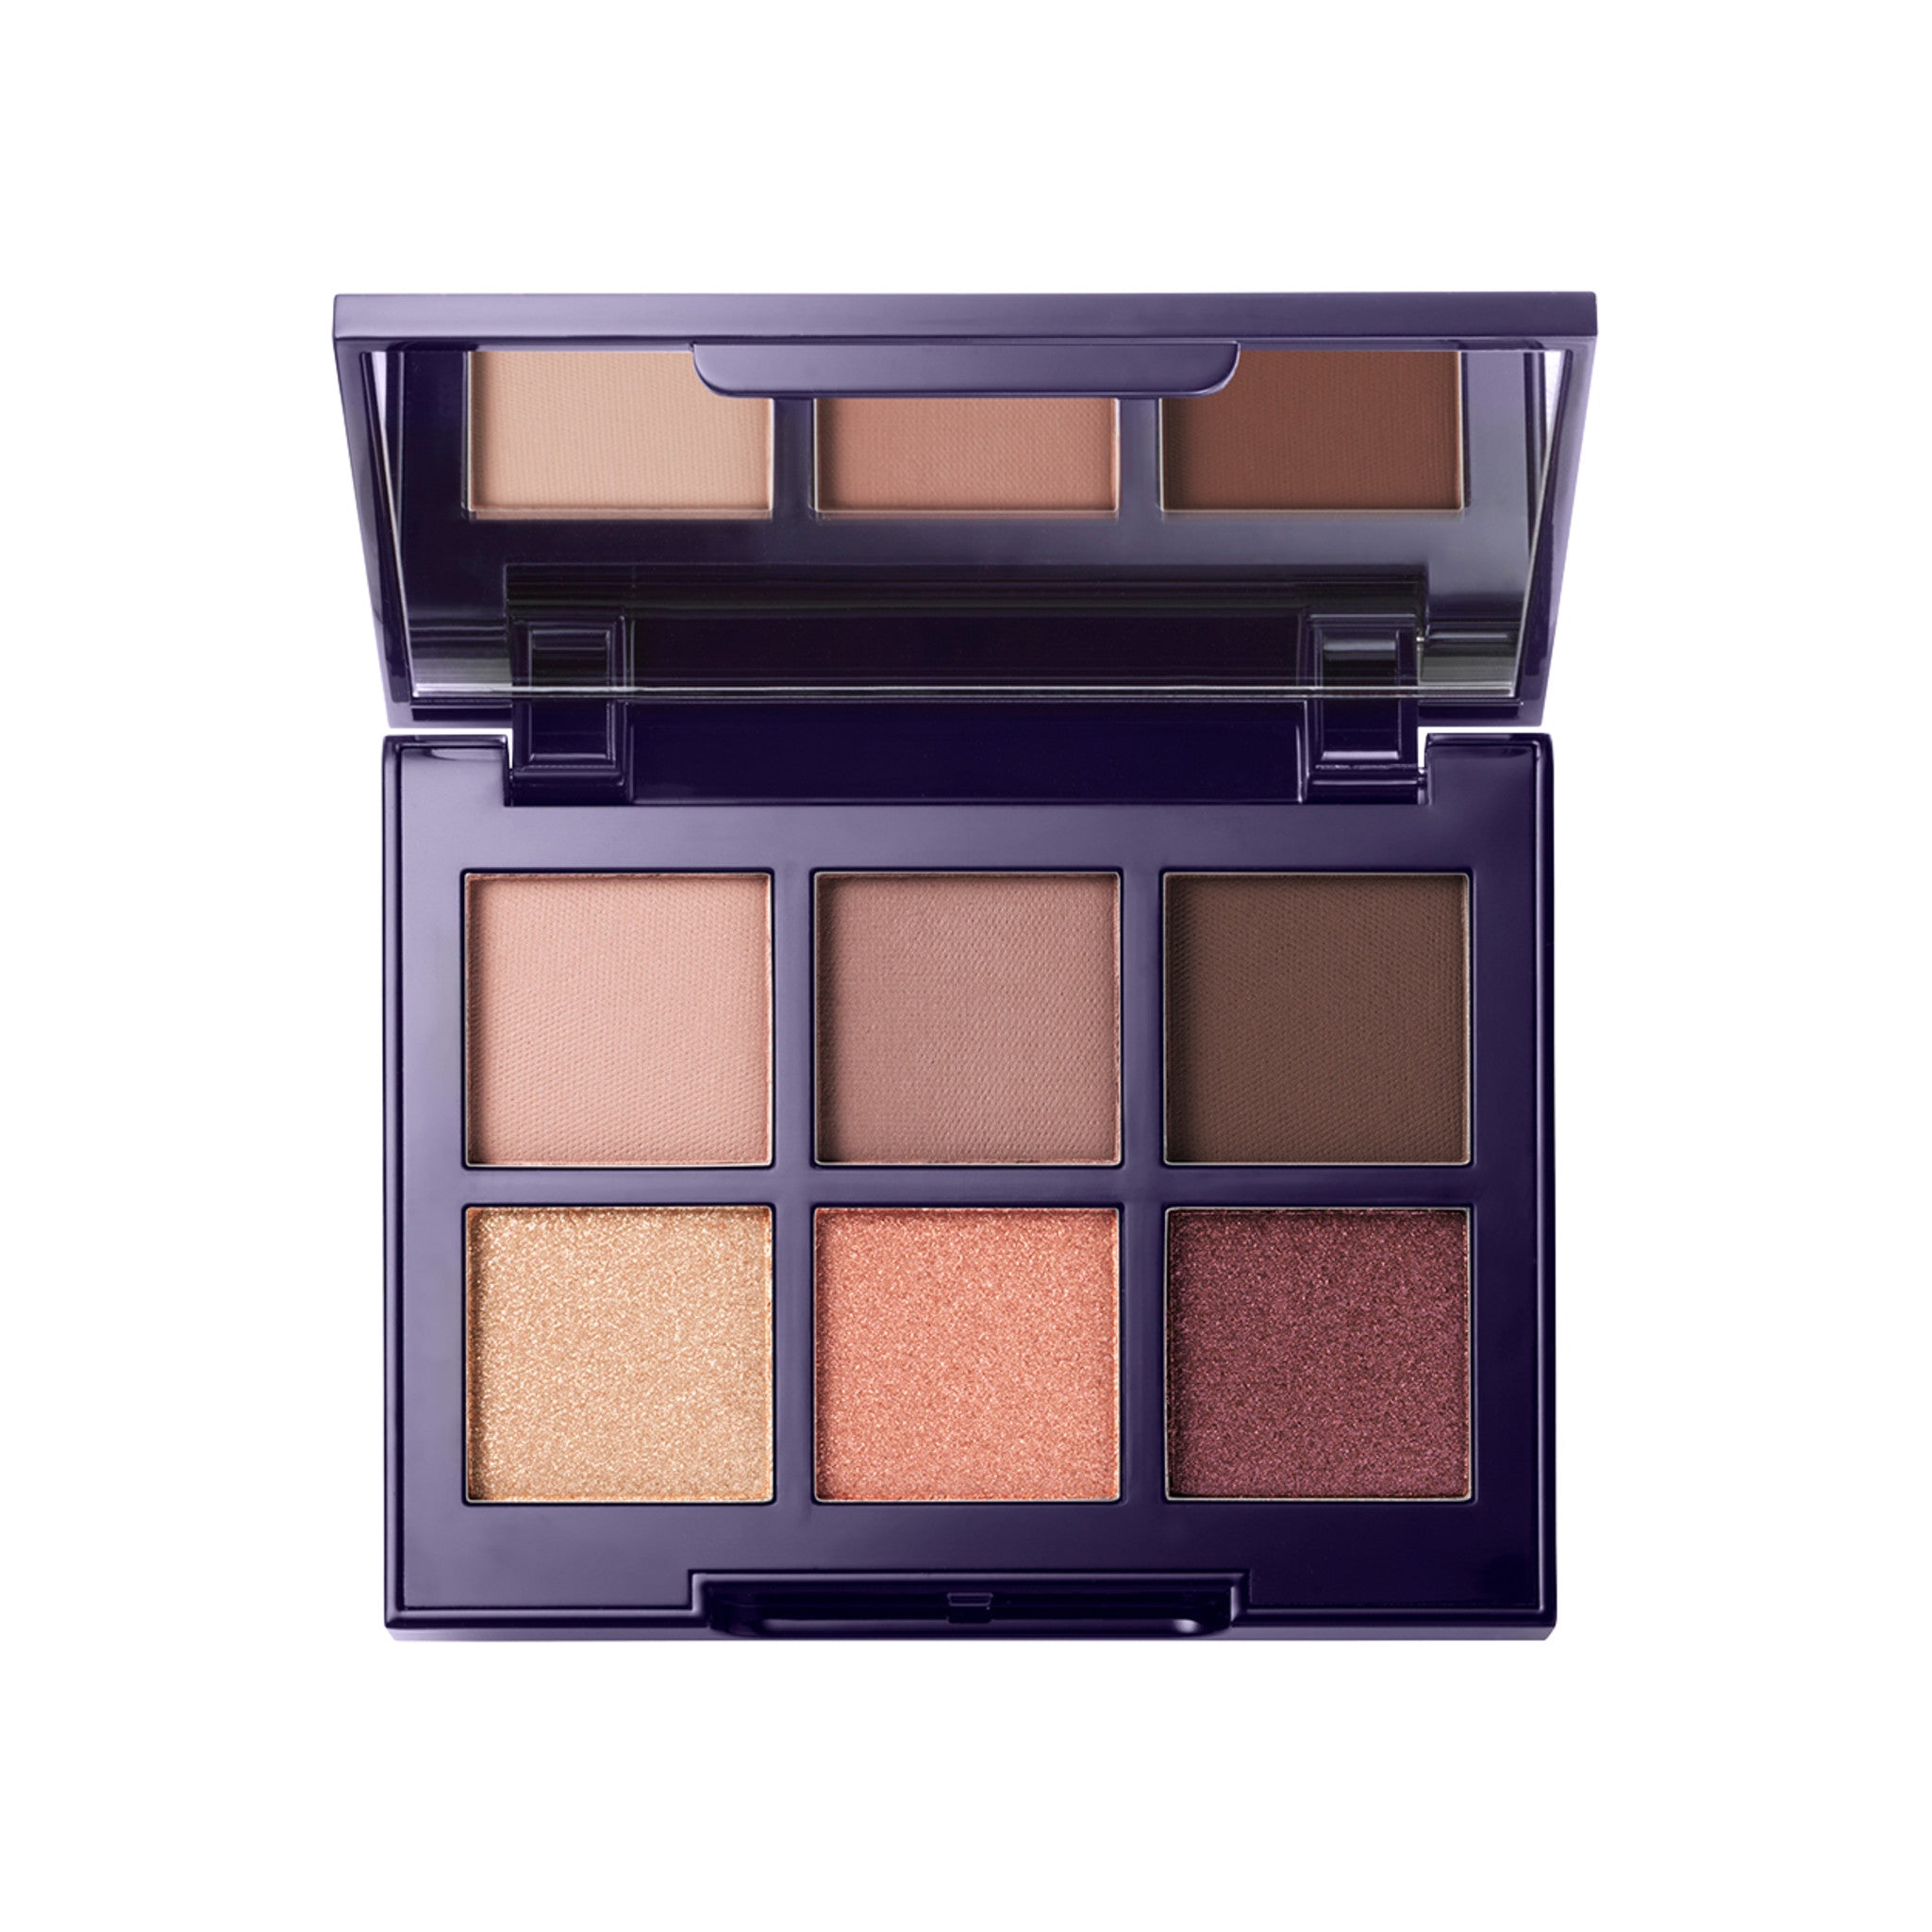 Kevyn Aucoin The Contour Eyeshadow Palette Color/Shade variant: Medium Deep main image. This product is in the color multi